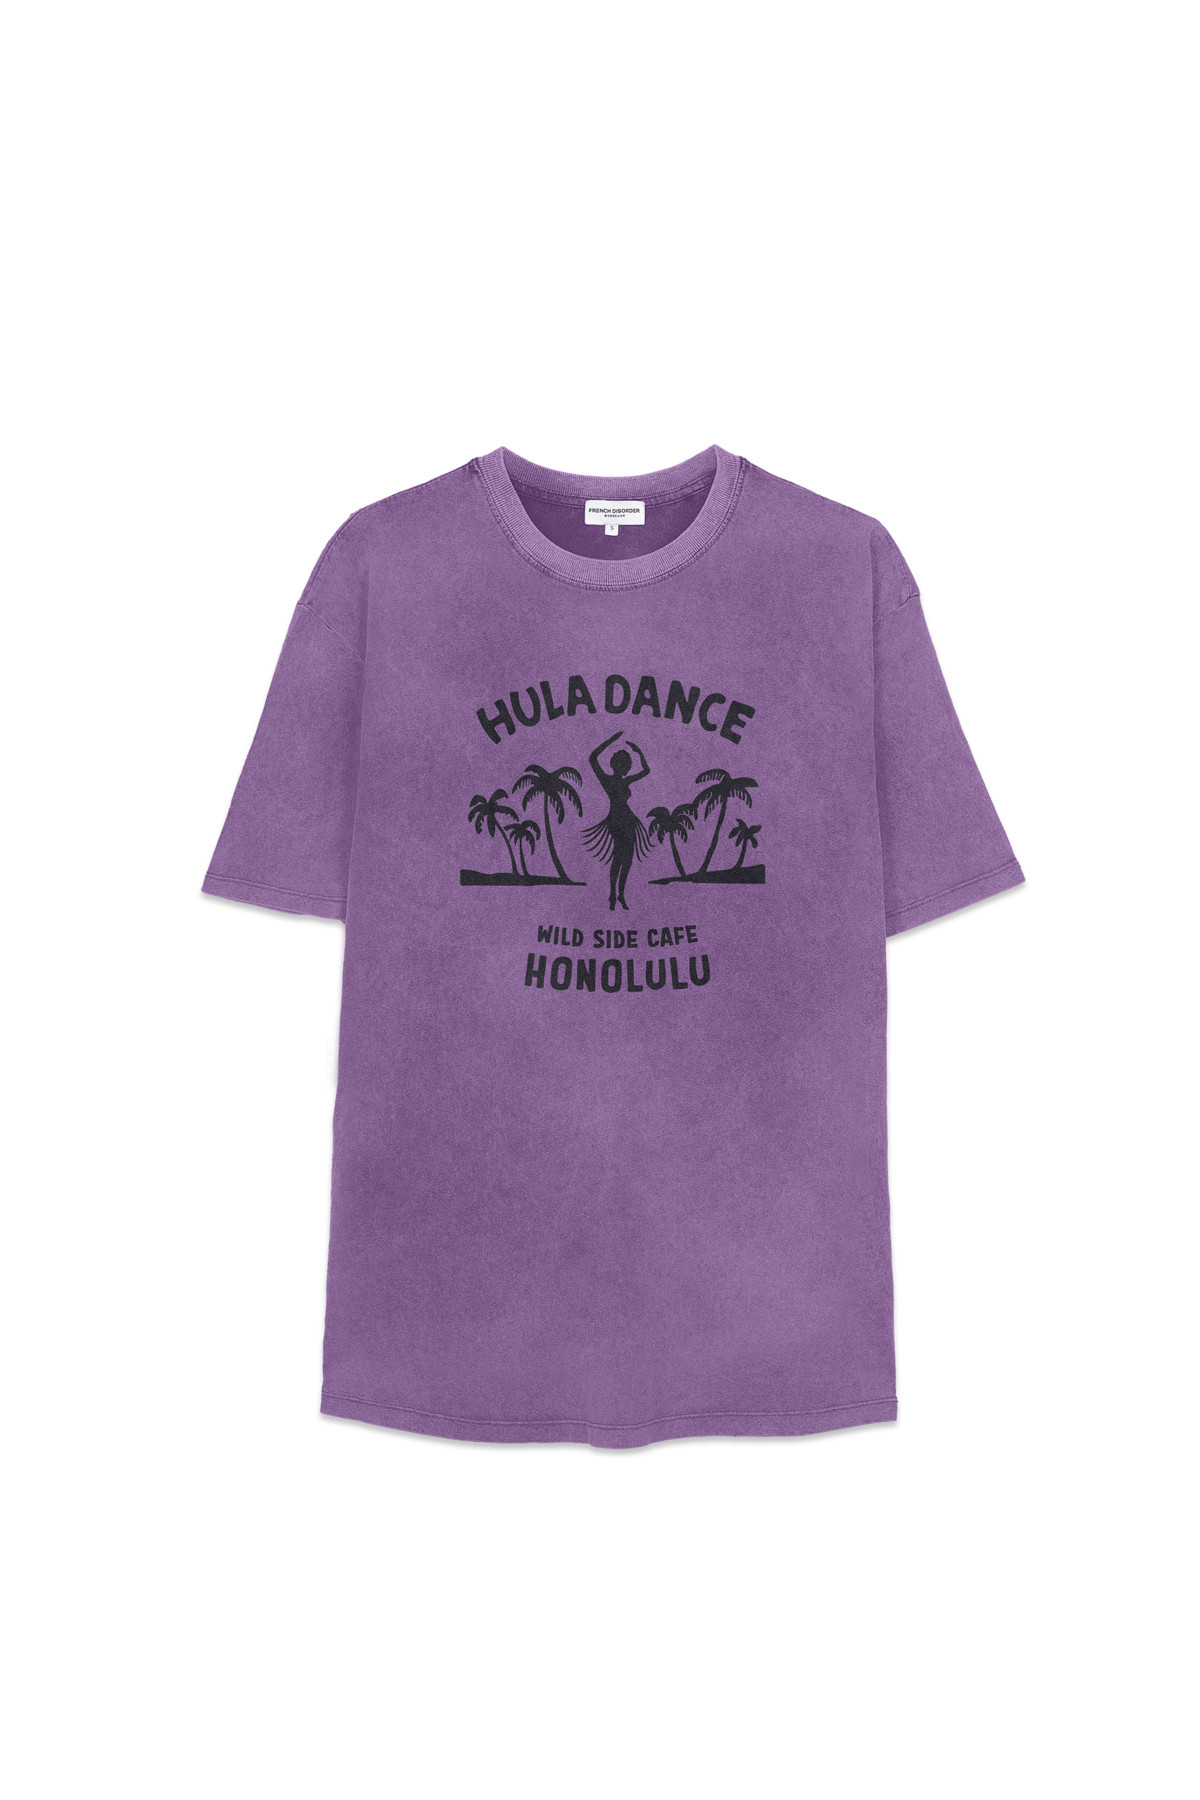 Photo de T-SHIRTS COL ROND Tshirt FEMME Washed HULA DANCE chez French Disorder